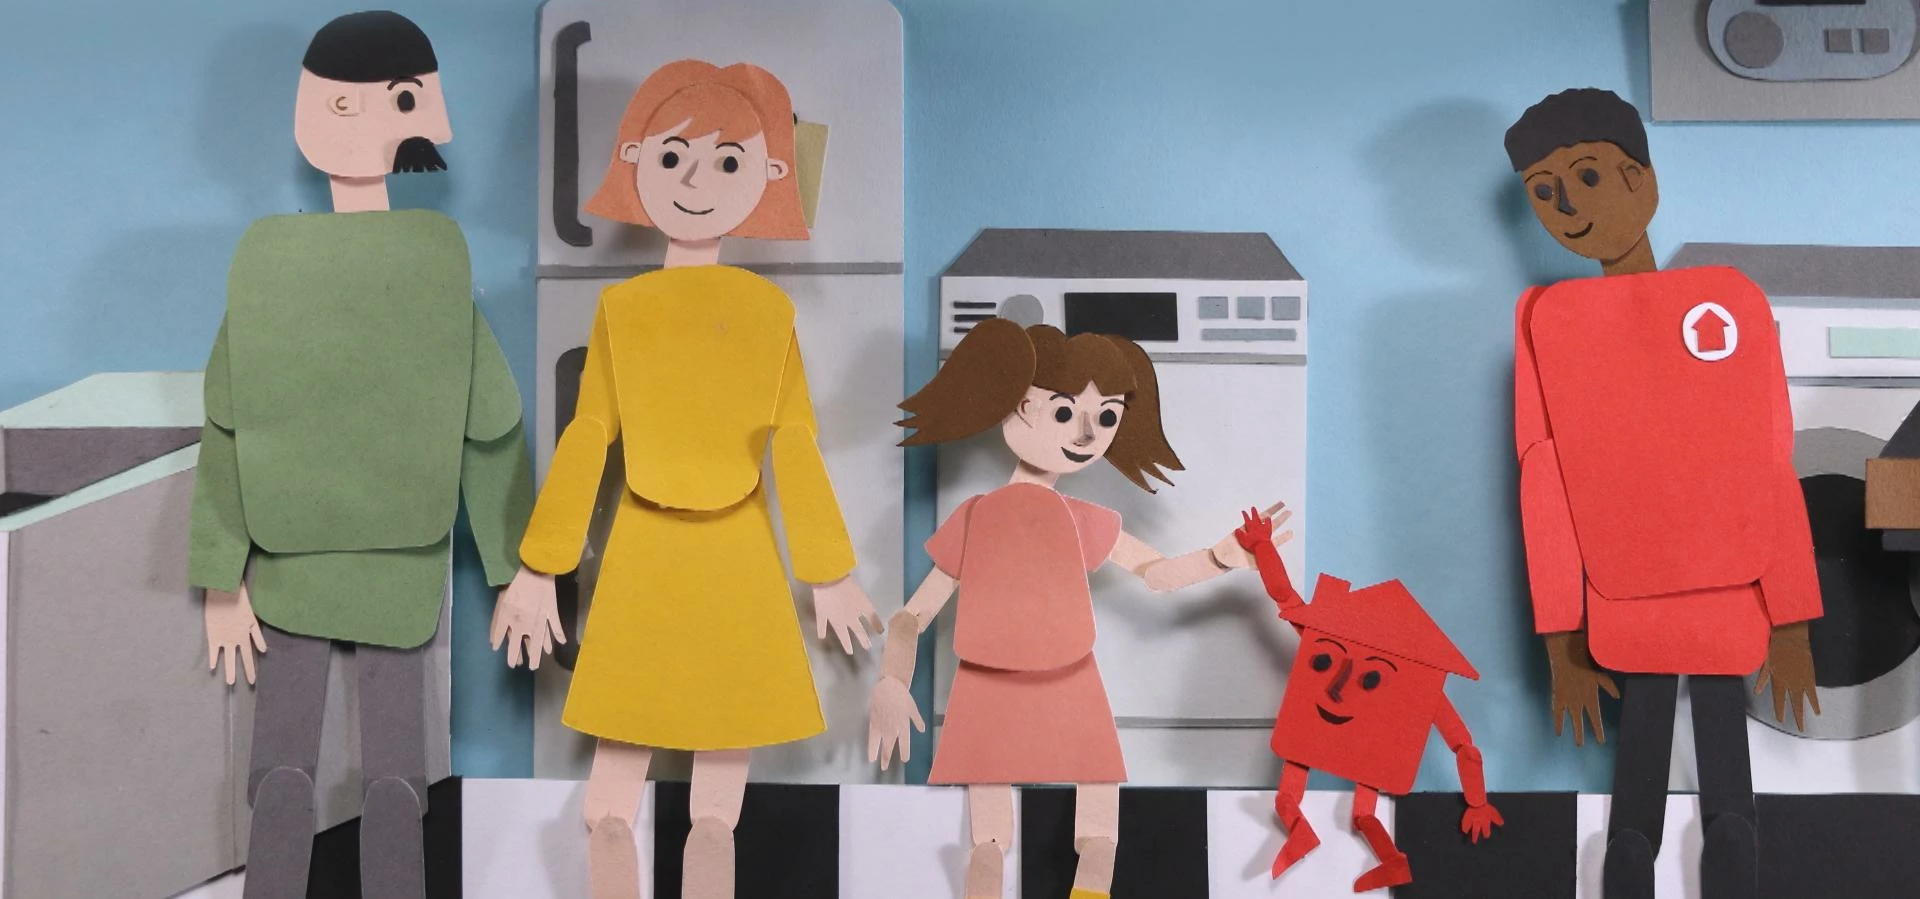 Bafta winner Jessica Ashman’s animation, commissioned exclusively for HomeServe’s "Big Spring Clean"